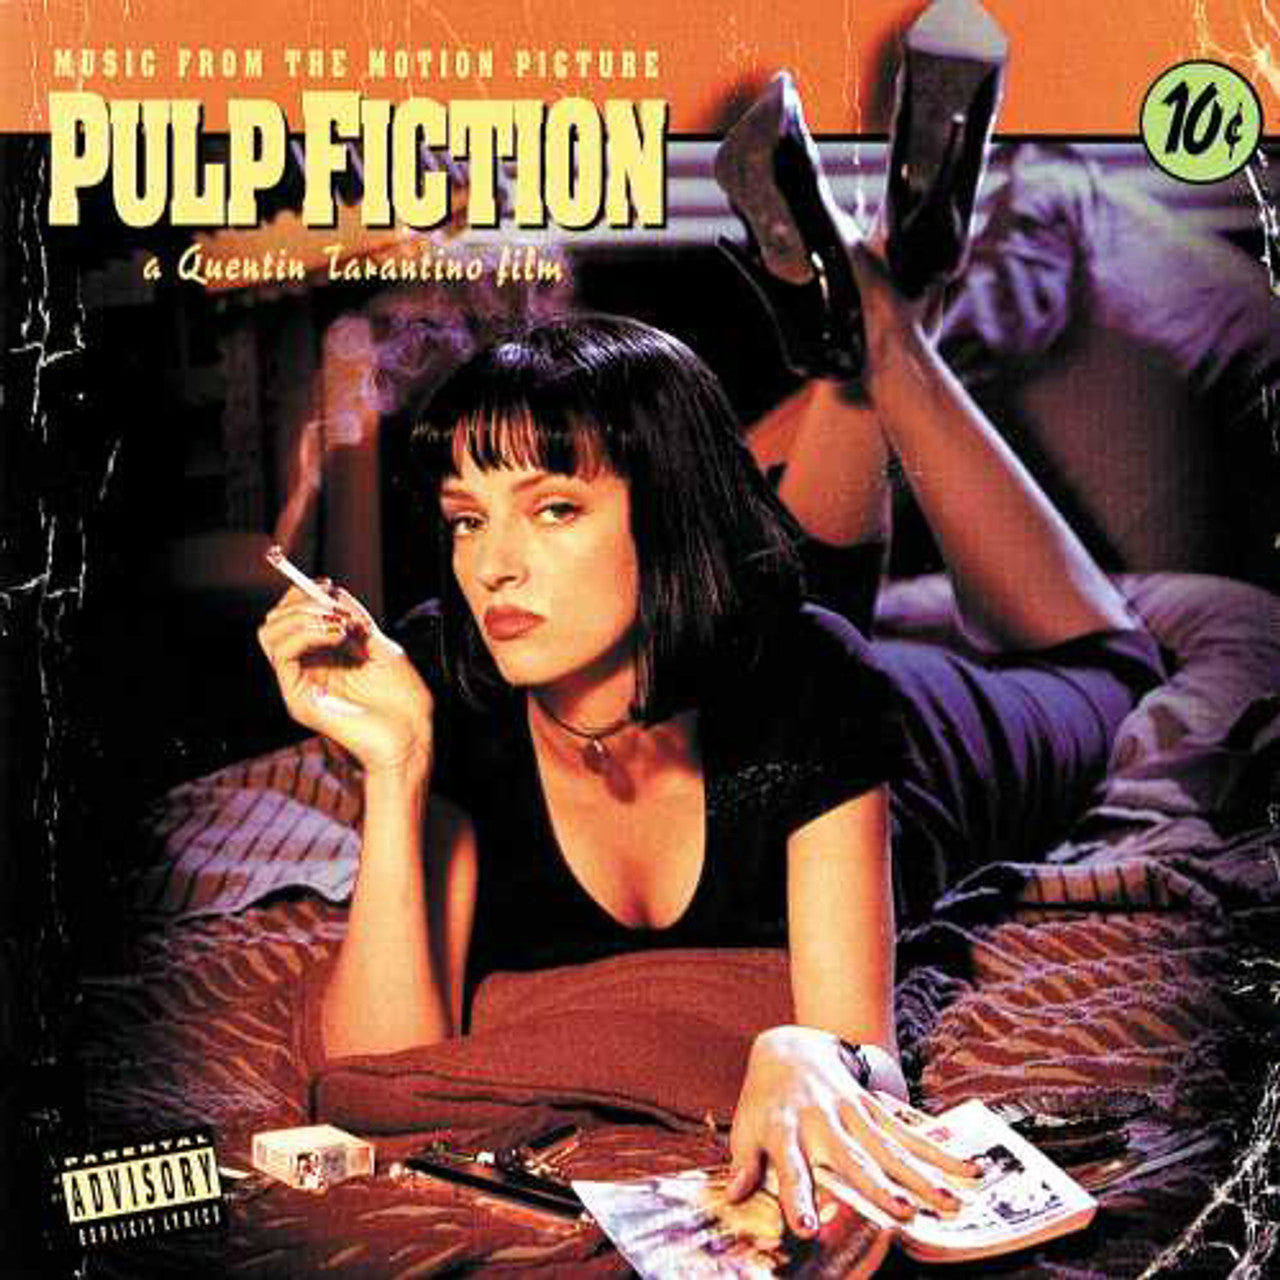 PULP FICTION: MUSIC FROM THE MOTION PICTURE - VINYL LP